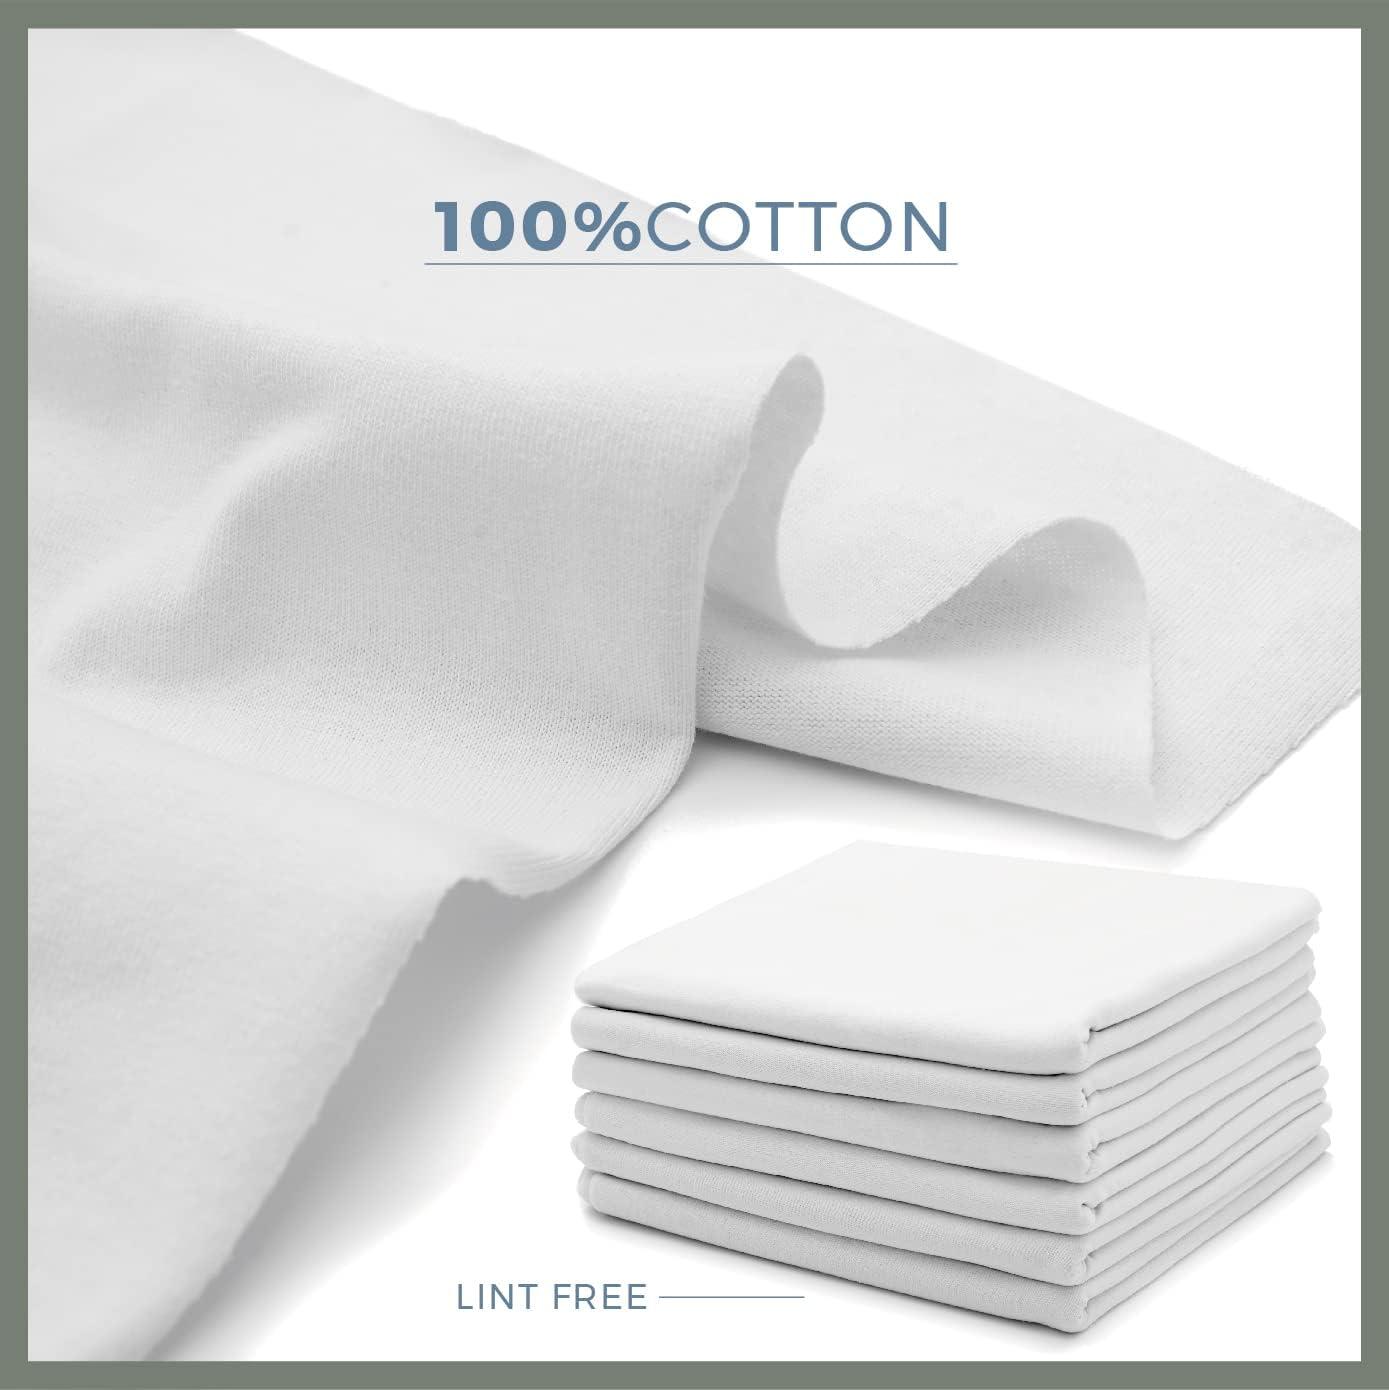 VALENGO New Lint Free Rags- 100% Cotton Rags for Cleaning Rags Cotton Cloth,  Soft Tshirt Rags, Lint Free Cloth for Cast Iron, Staining Wood, Dust Rags,  Shoe Polish Cloth Bag of Rags